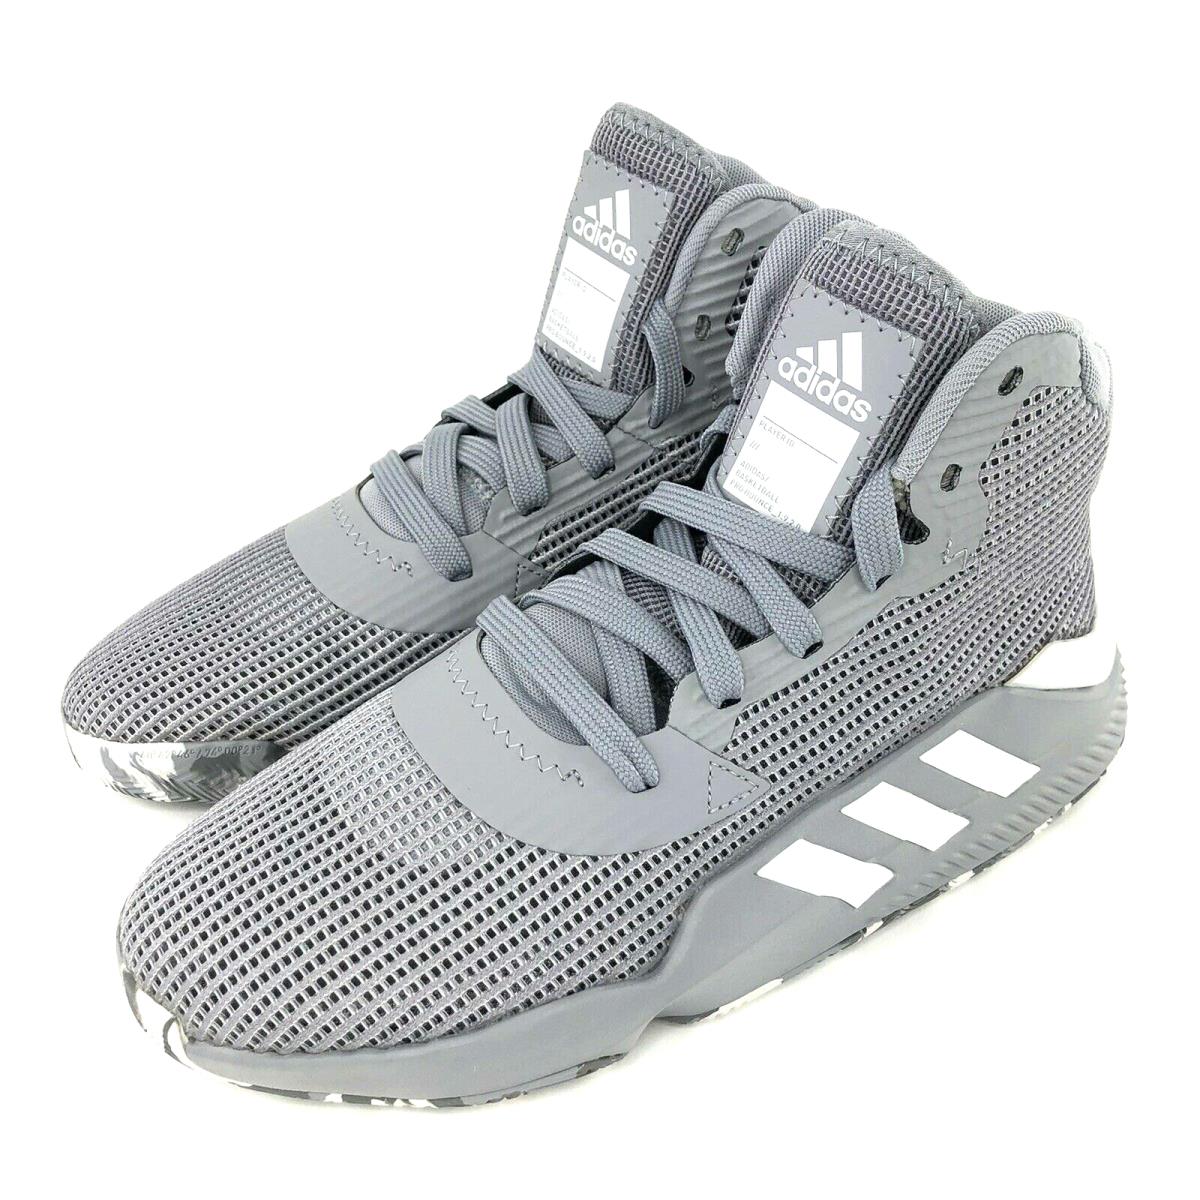 Adidas Pro Bounce 2019 Mens 6.5 Grey Basketball Sneakers Shoes - Gray